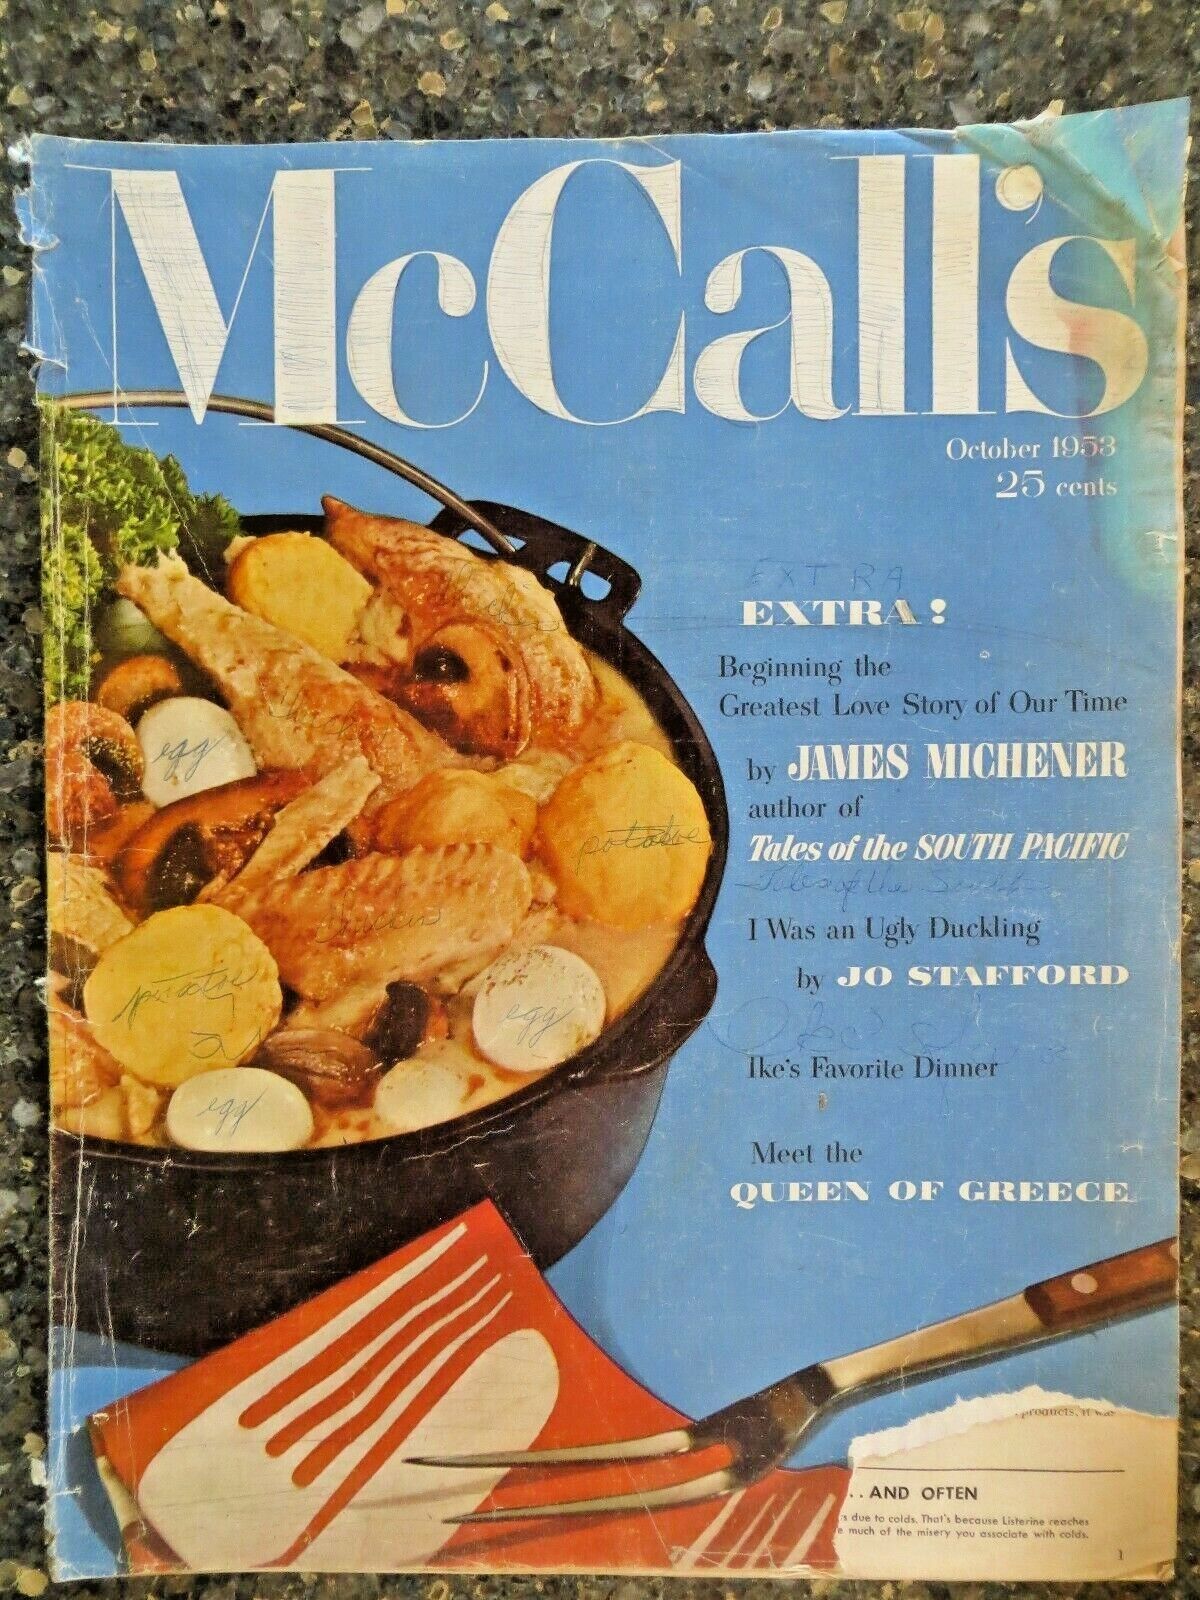 McCall\'s Magazine   October 1958   Queen of Greece   VINTAGE ADS 